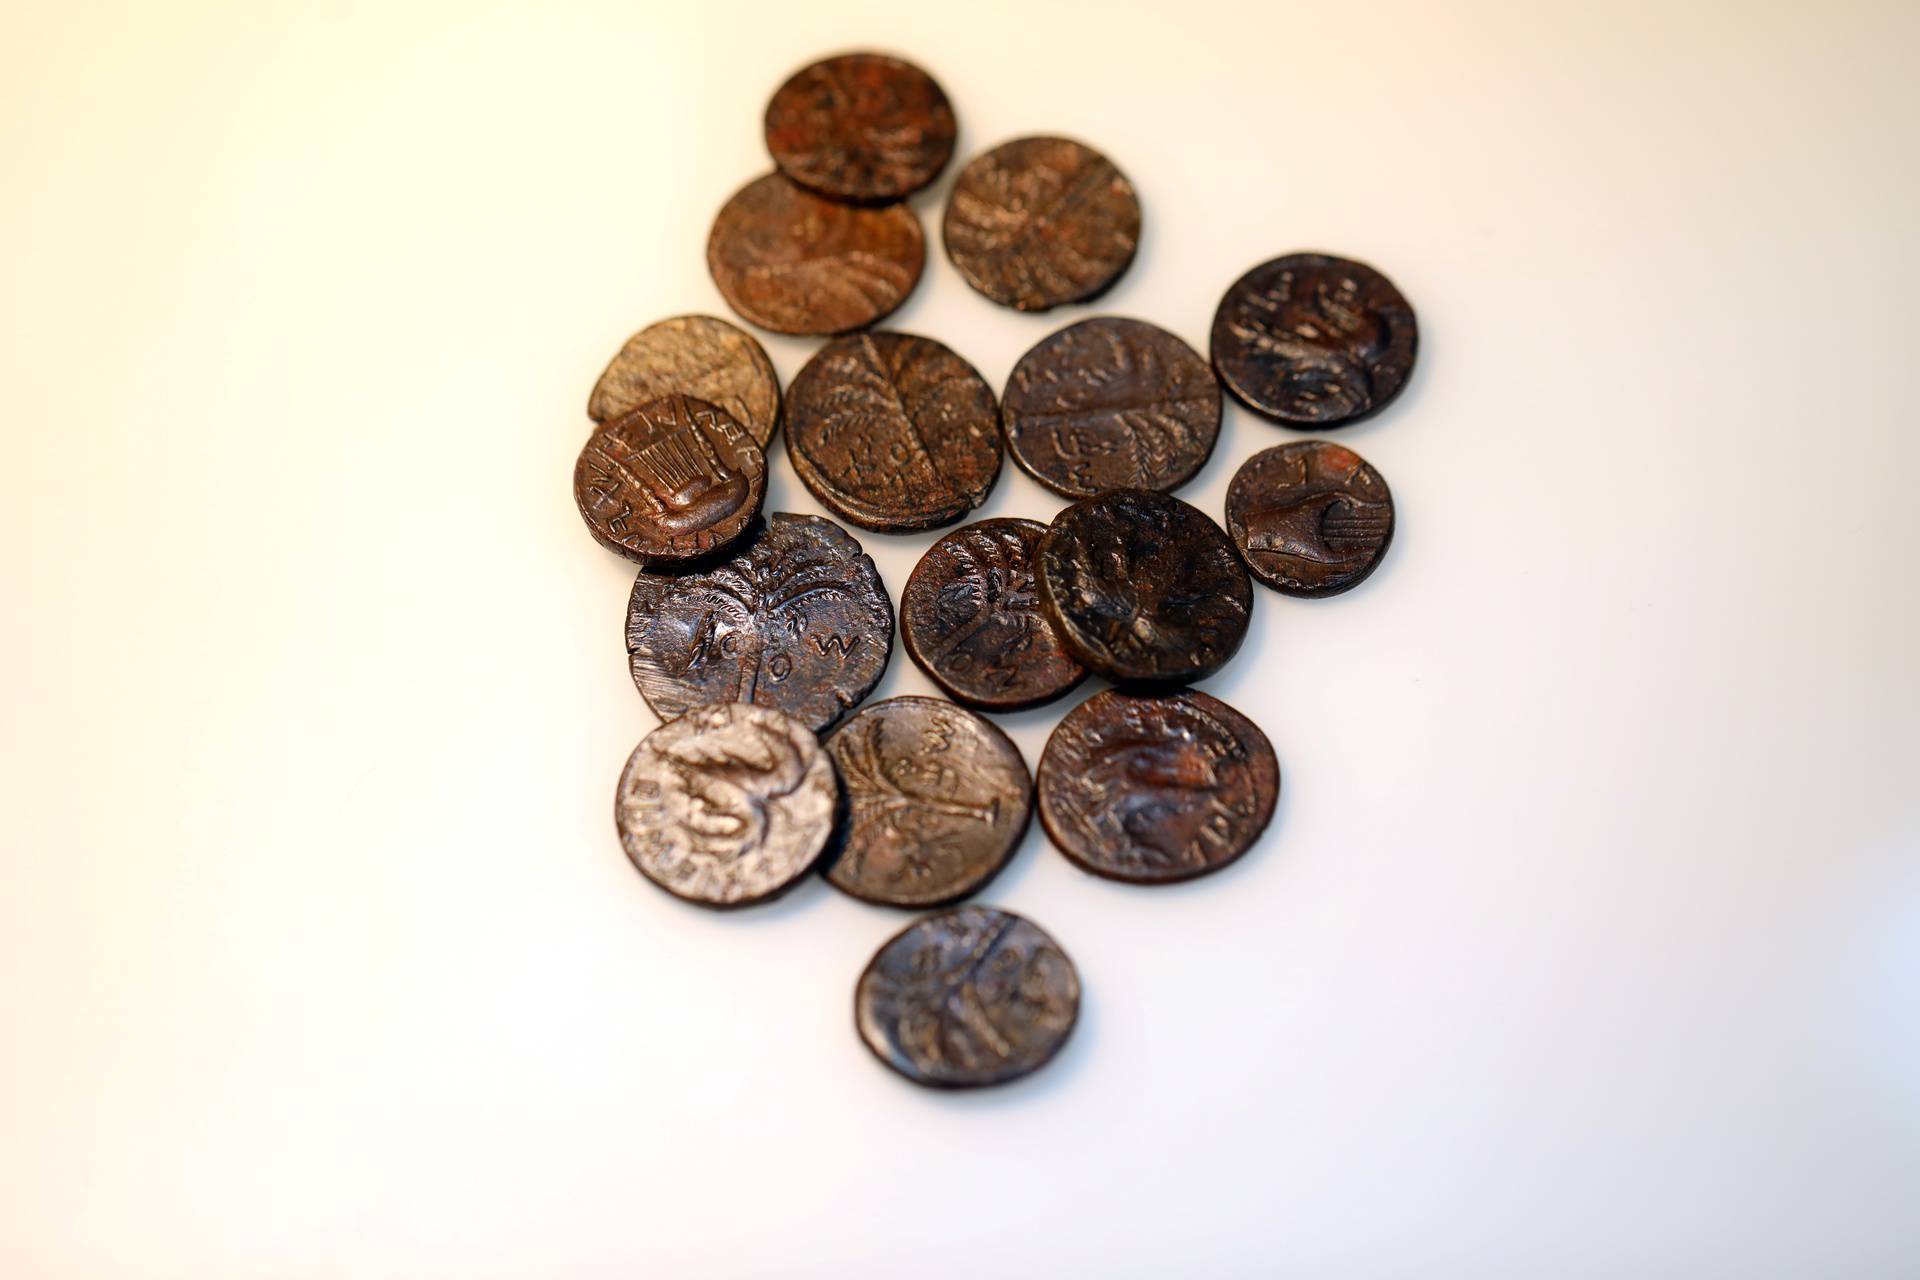 Ancient coins, part of various artefacts recently discovered in the Judean Desert caves along with scroll fragments of an ancient biblical texts, are seen during an unveiling event for media at Israel Antiquities Authority laboratories in Jerusalem